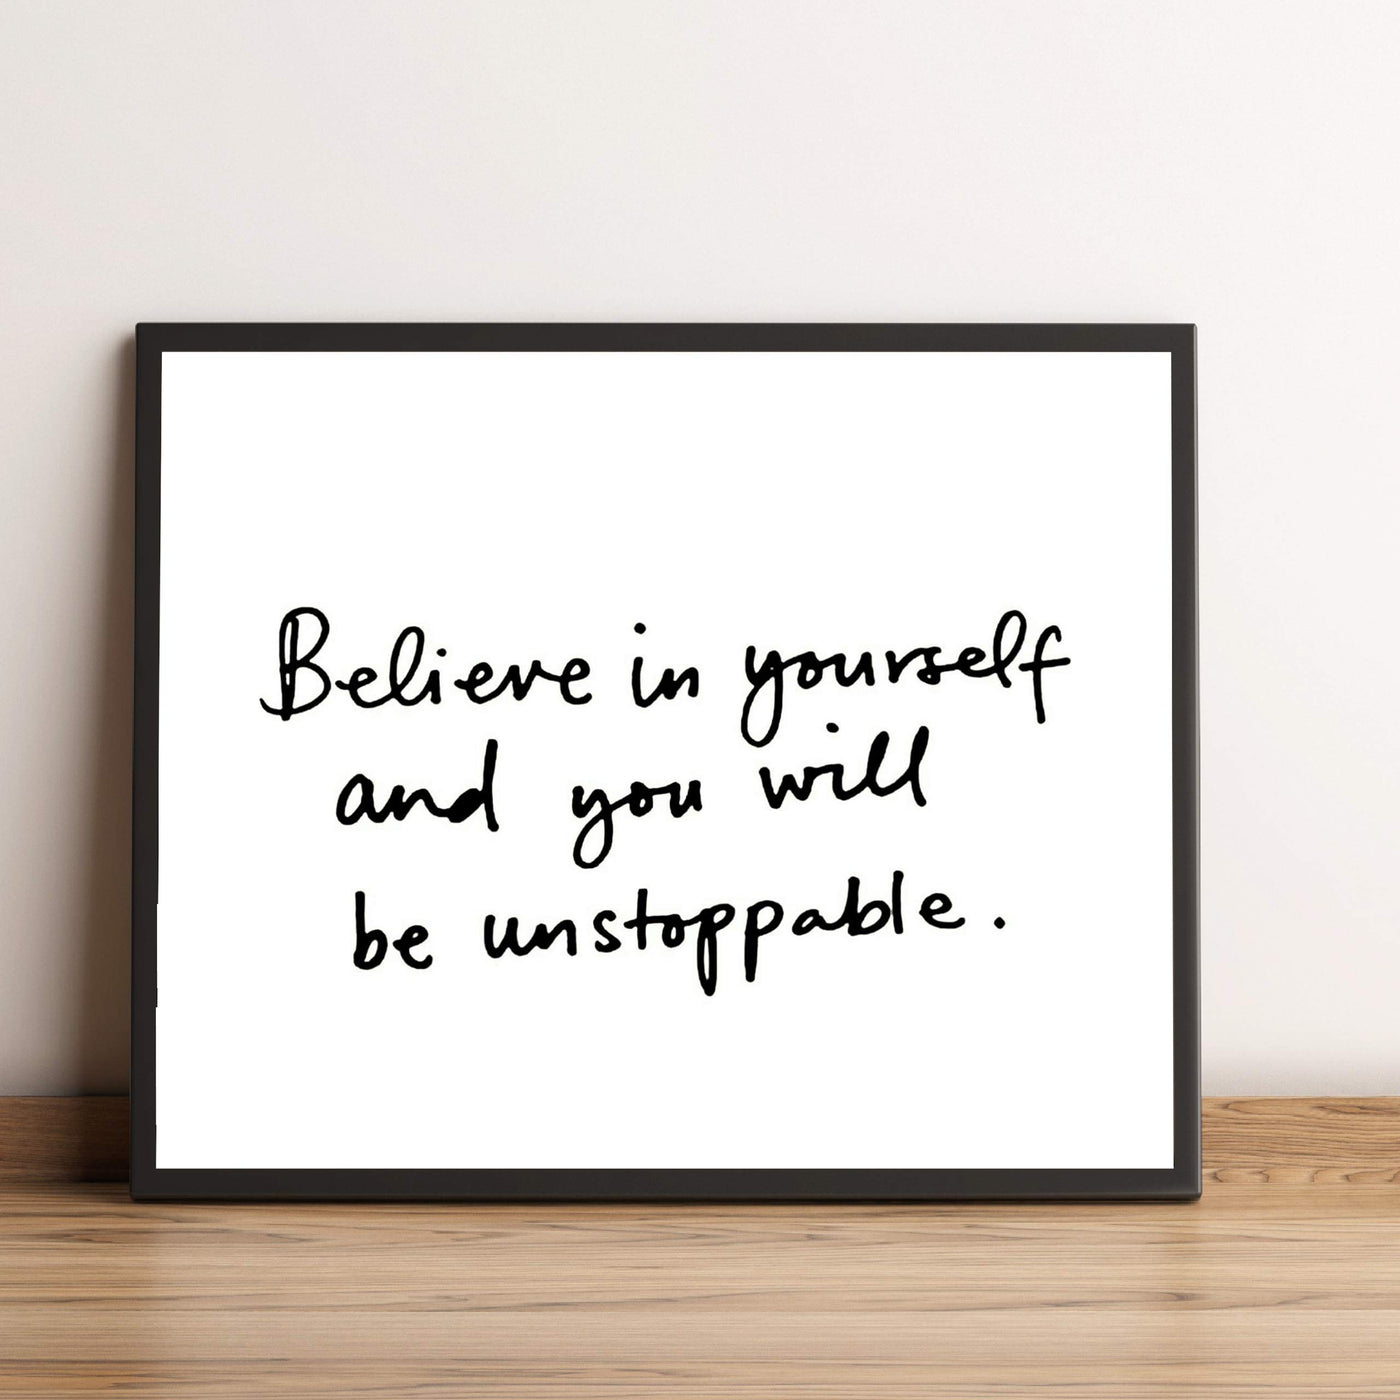 Believe in Yourself- Inspirational Wall Art- 8 x 10 Print Wall Art Ready to Frame. Motivational Wall Art Ideal for Home D?cor & Office D?cor. Makes a Perfect Gift of Encouragement-Friends & Coworkers